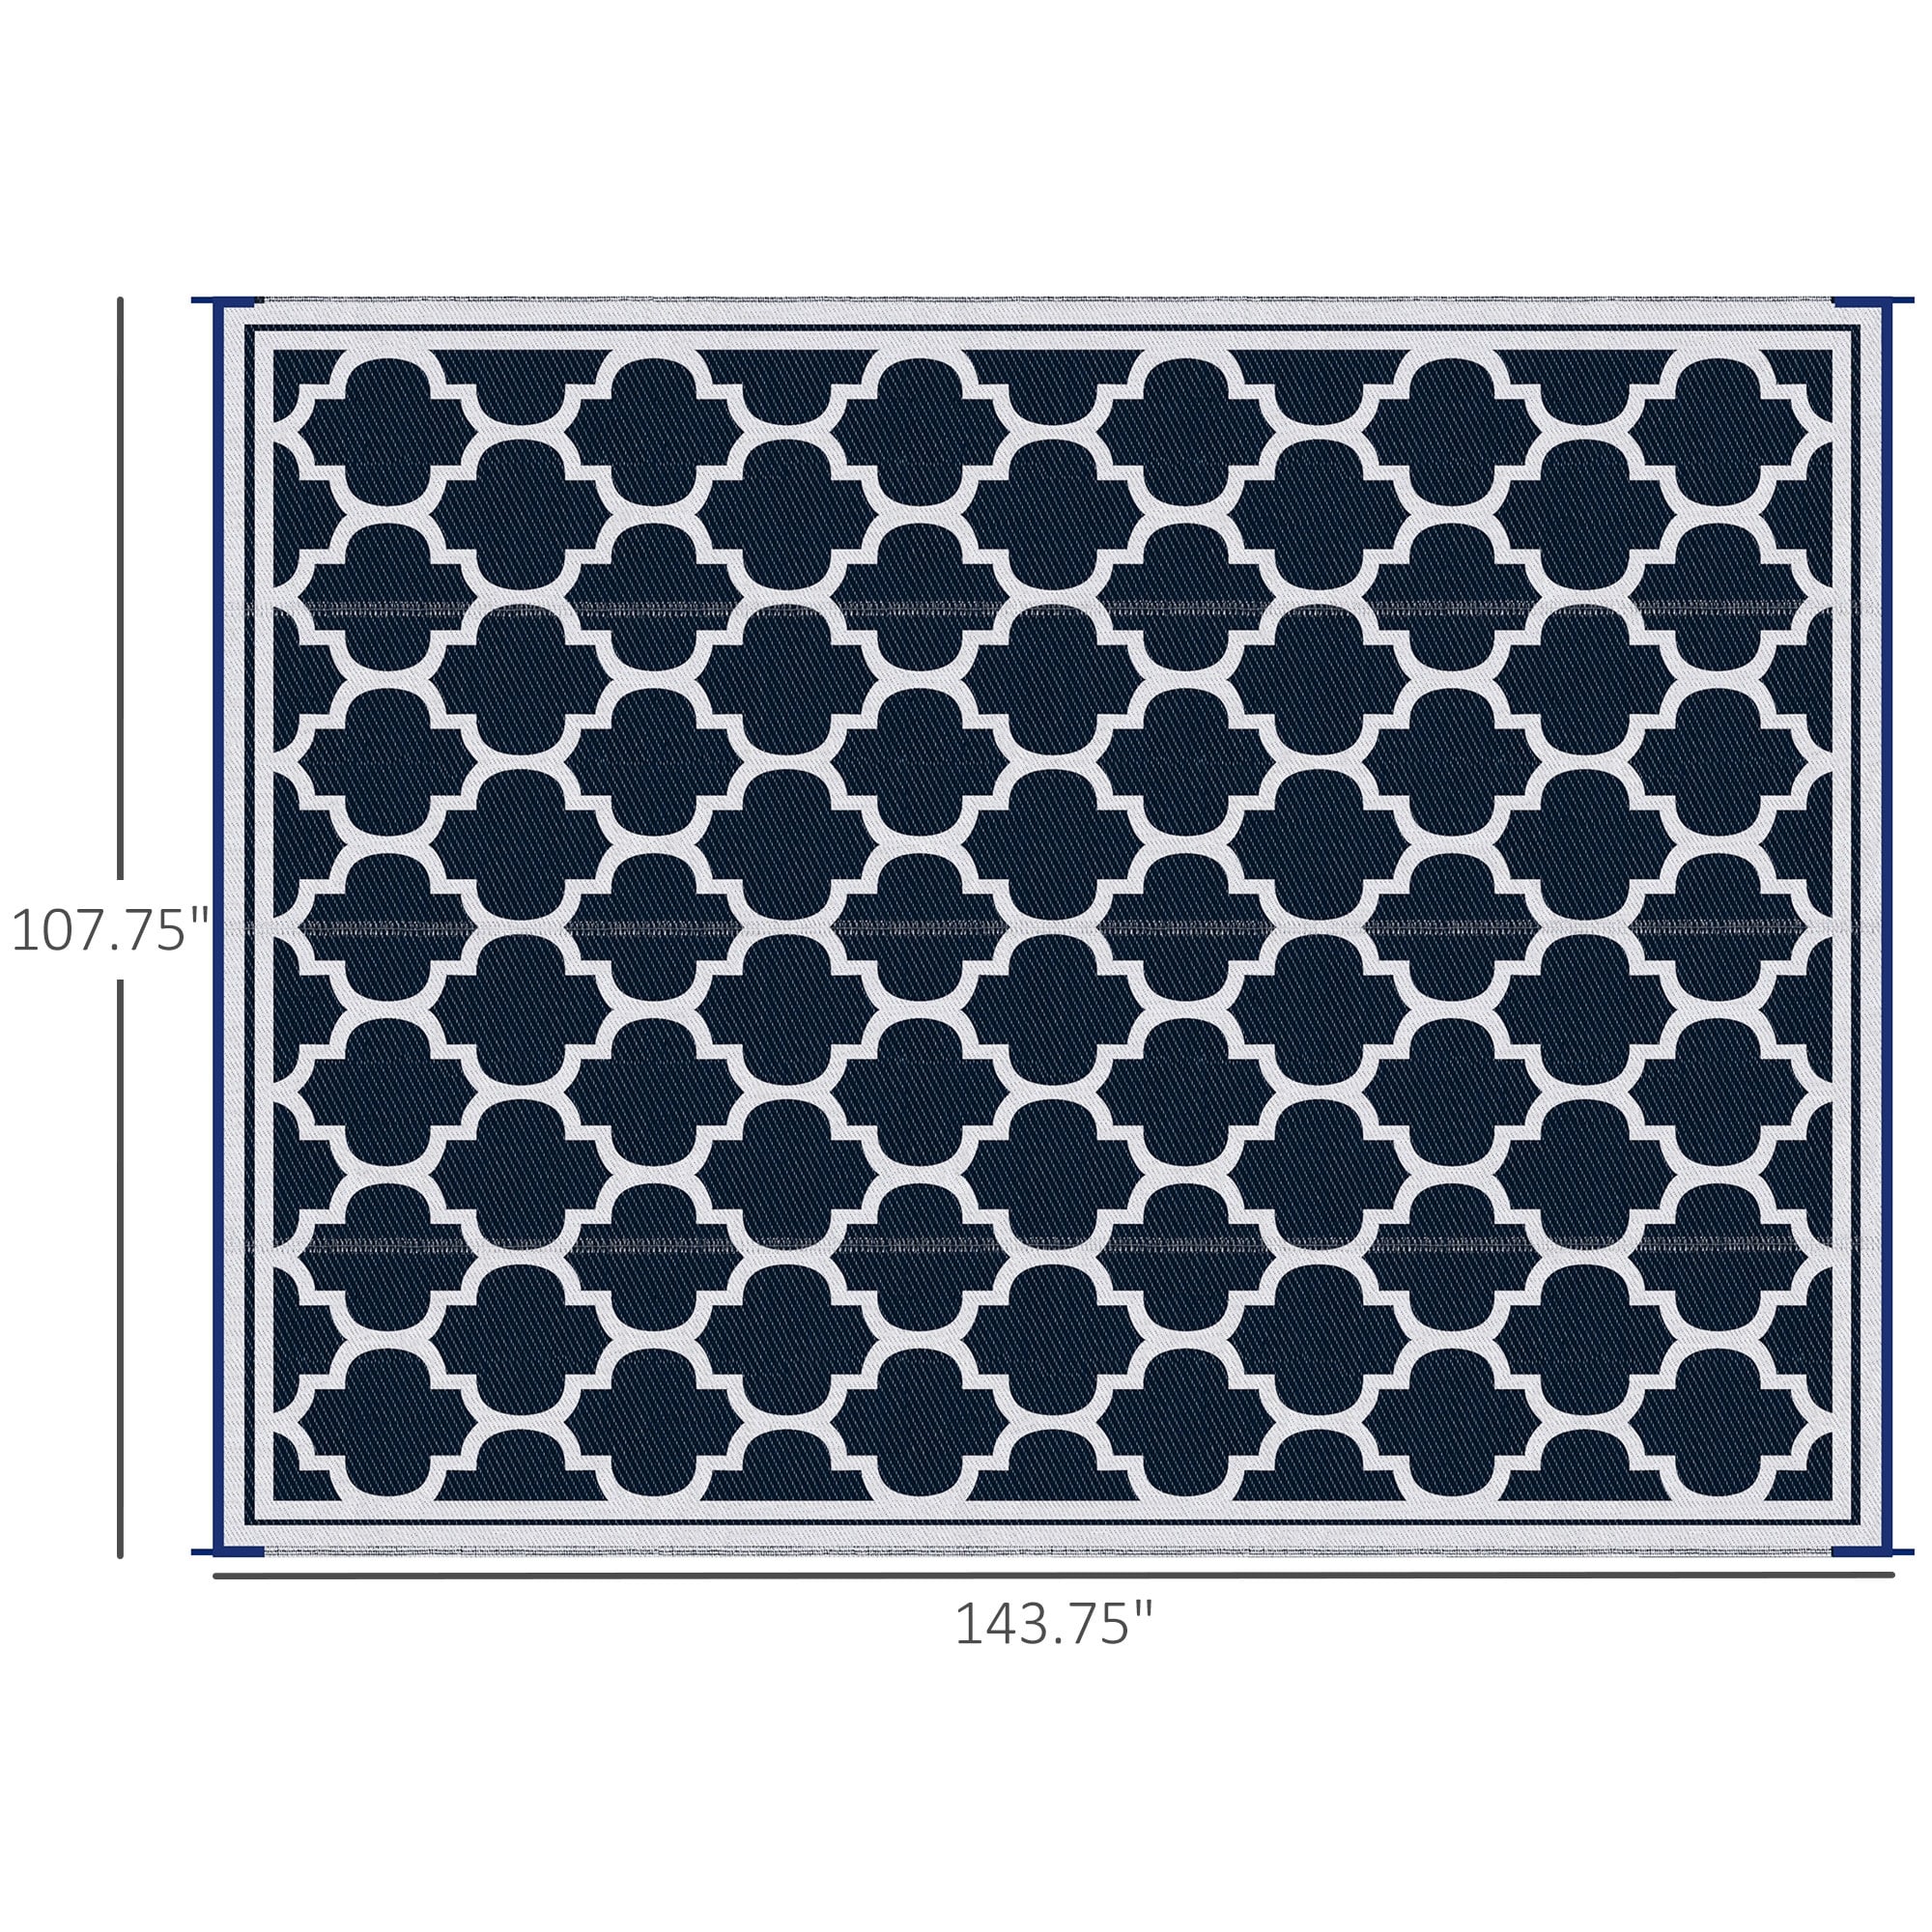 https://ak1.ostkcdn.com/images/products/is/images/direct/3046d5e69737de1e444661bf3365ba3c14b9453f/Outsunny-Reversible-Outdoor-RV-Rug%2C-Patio-Floor-Mat%2C-Plastic-Straw-Rug-for-Backyard%2C-Deck%2C-Picnic%2C-Beach%2C-Camping.jpg